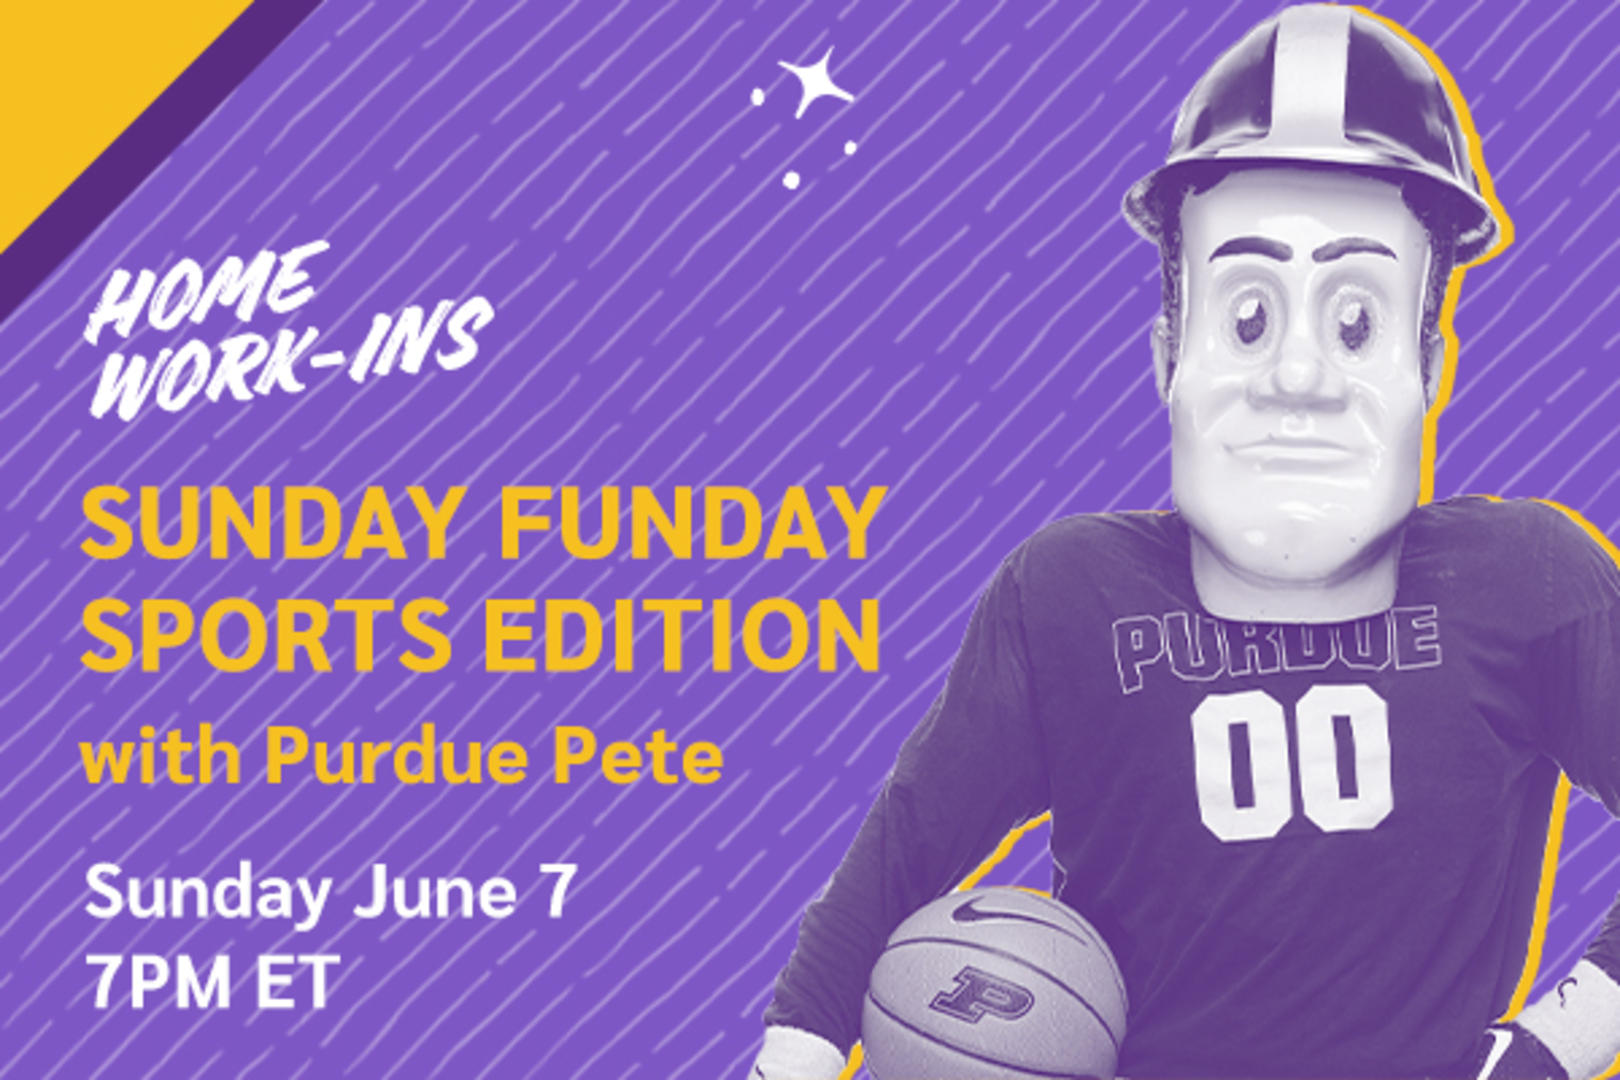 Image showing the copy Sunday 7PM ET - Sunday Funday Sports Edition with Purdue Pete